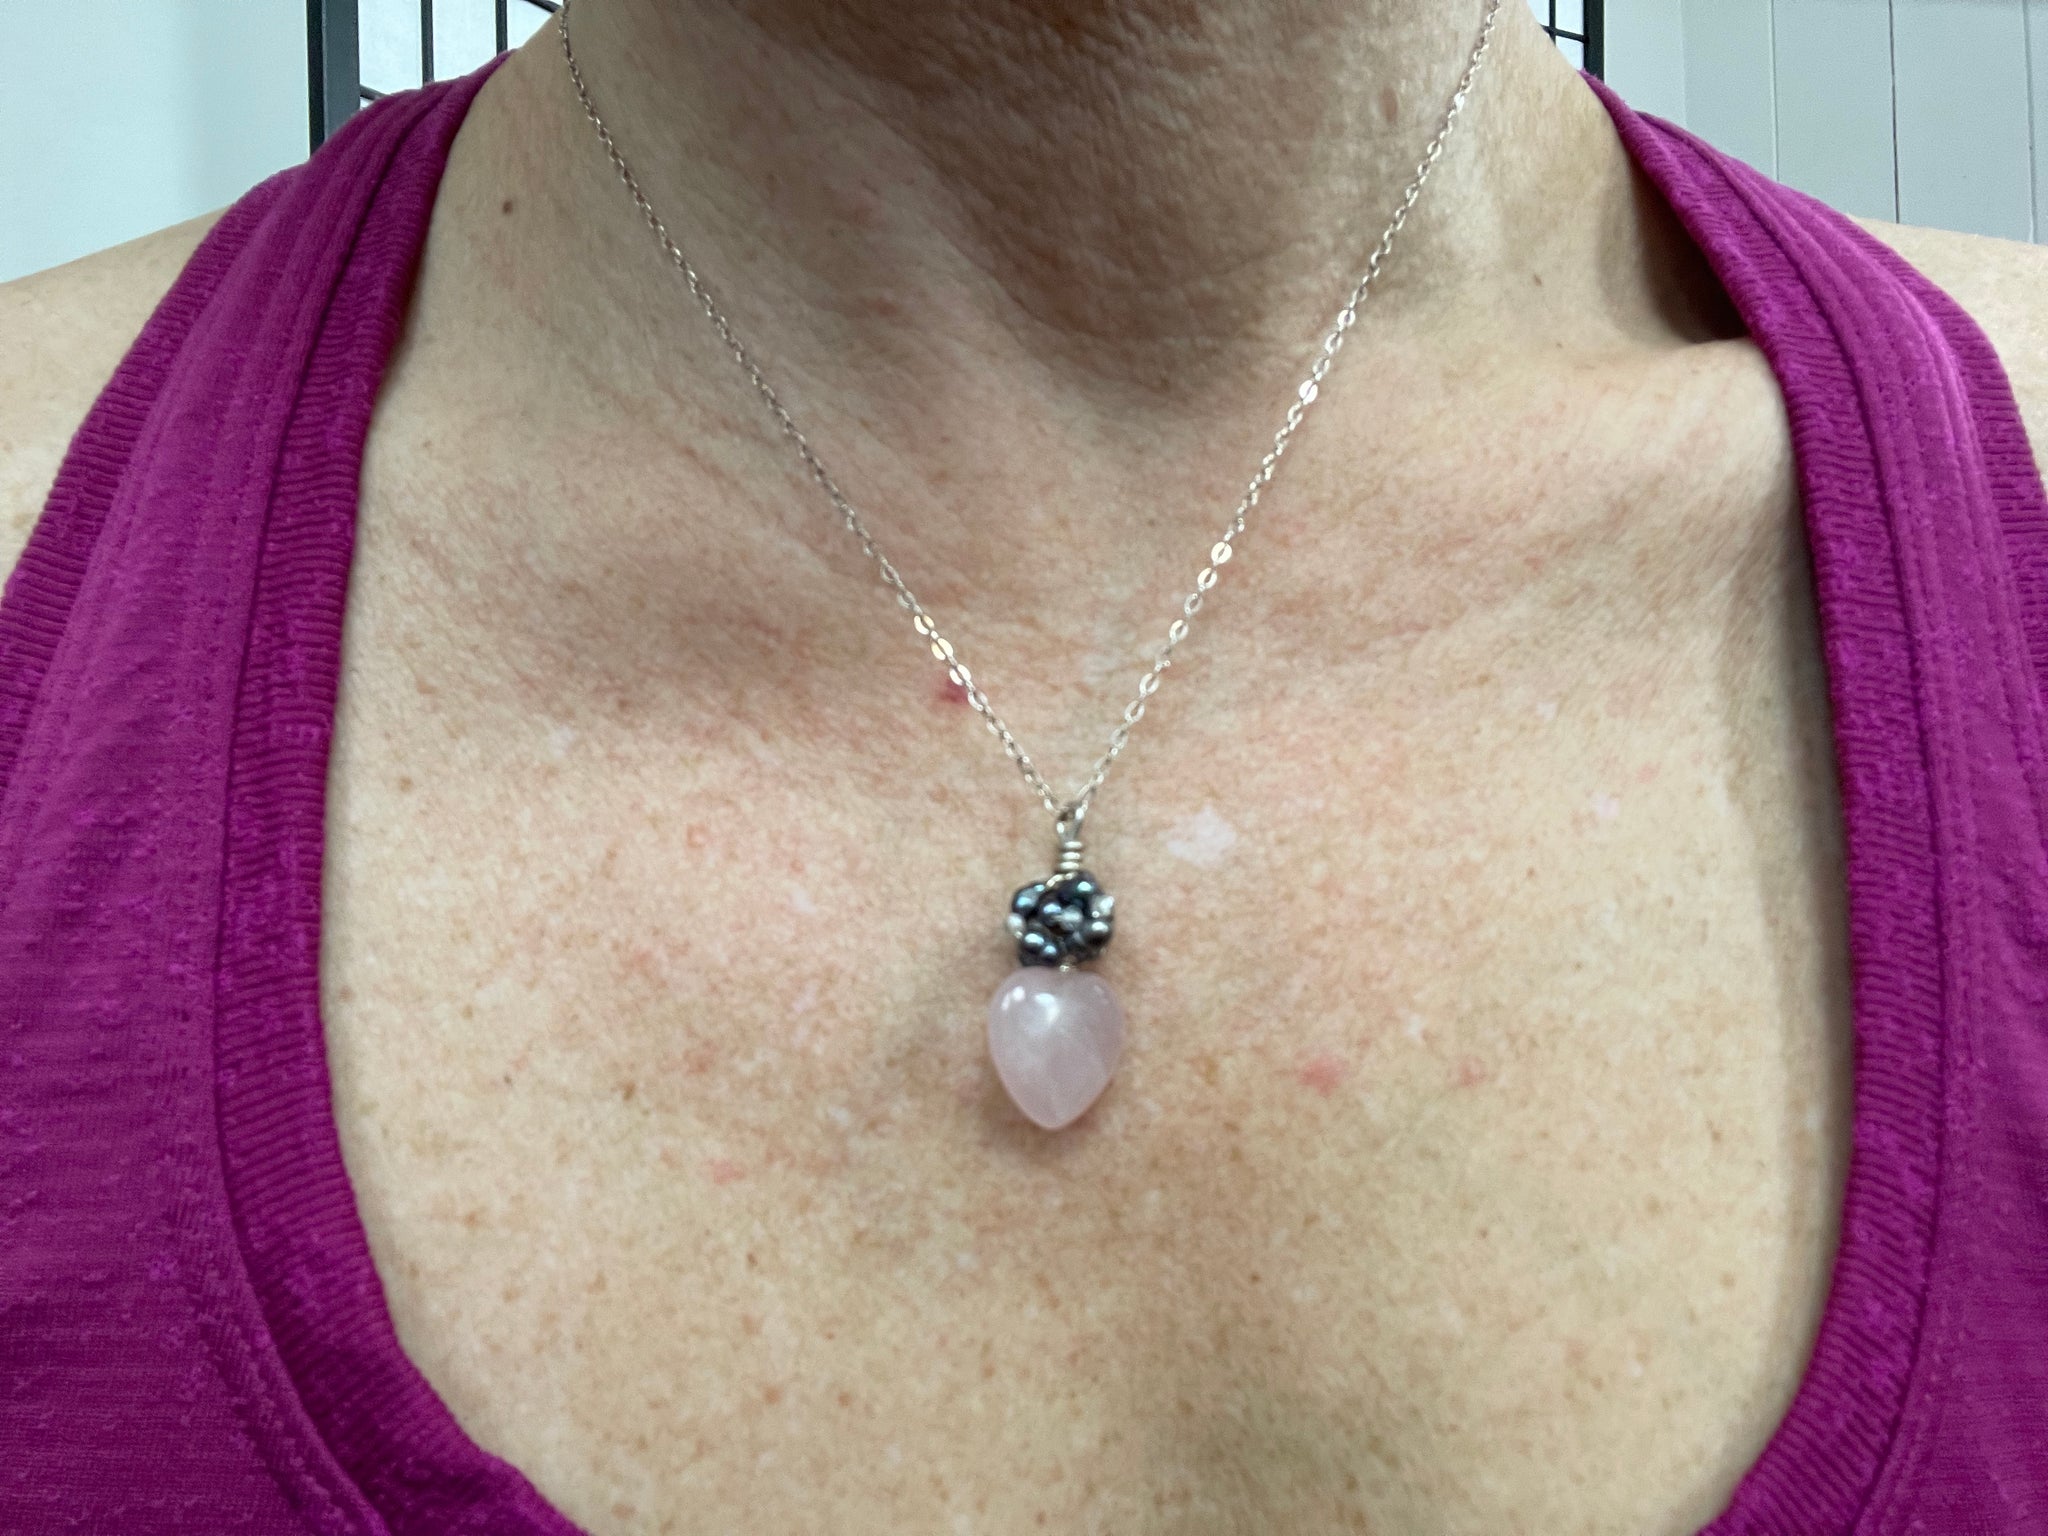 Heart and Pearls Necklace by Sylvia Dawe